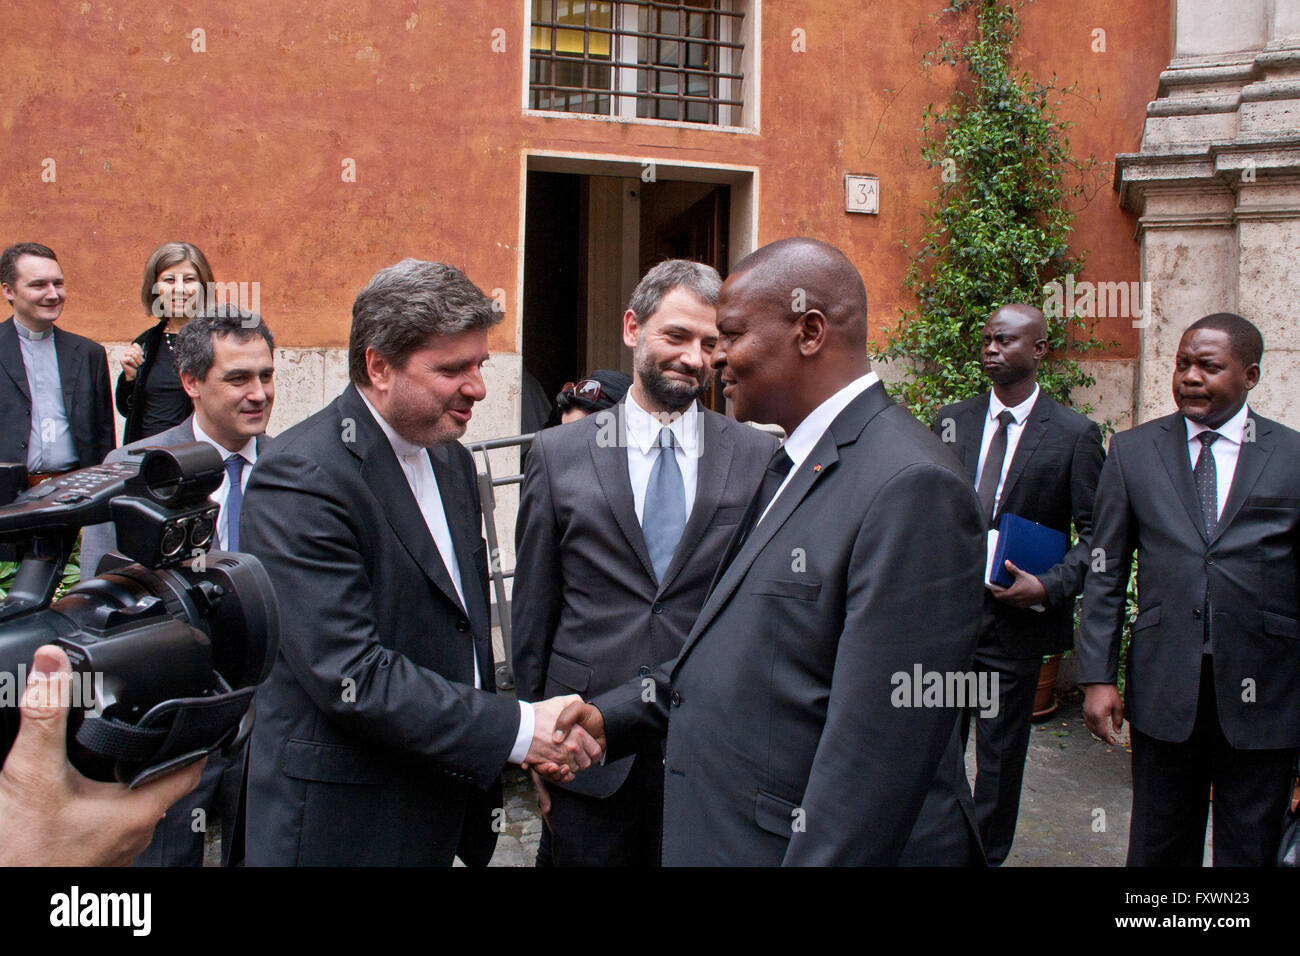 Roma, Italy. 18th Apr, 2016. President of the Central African Republic, Faustin-Archange Touadéra, come on a visit to Rome to thank Pope Francis for accepting Syrian refugees. It's the first official visit of Touadéra in Italy. The President chose to visit the Community of Sant'Egidio, where Pope Francis houses some of Syrian refugee families. © Emiliano Grillo/Pacific Press/Alamy Live News Stock Photo